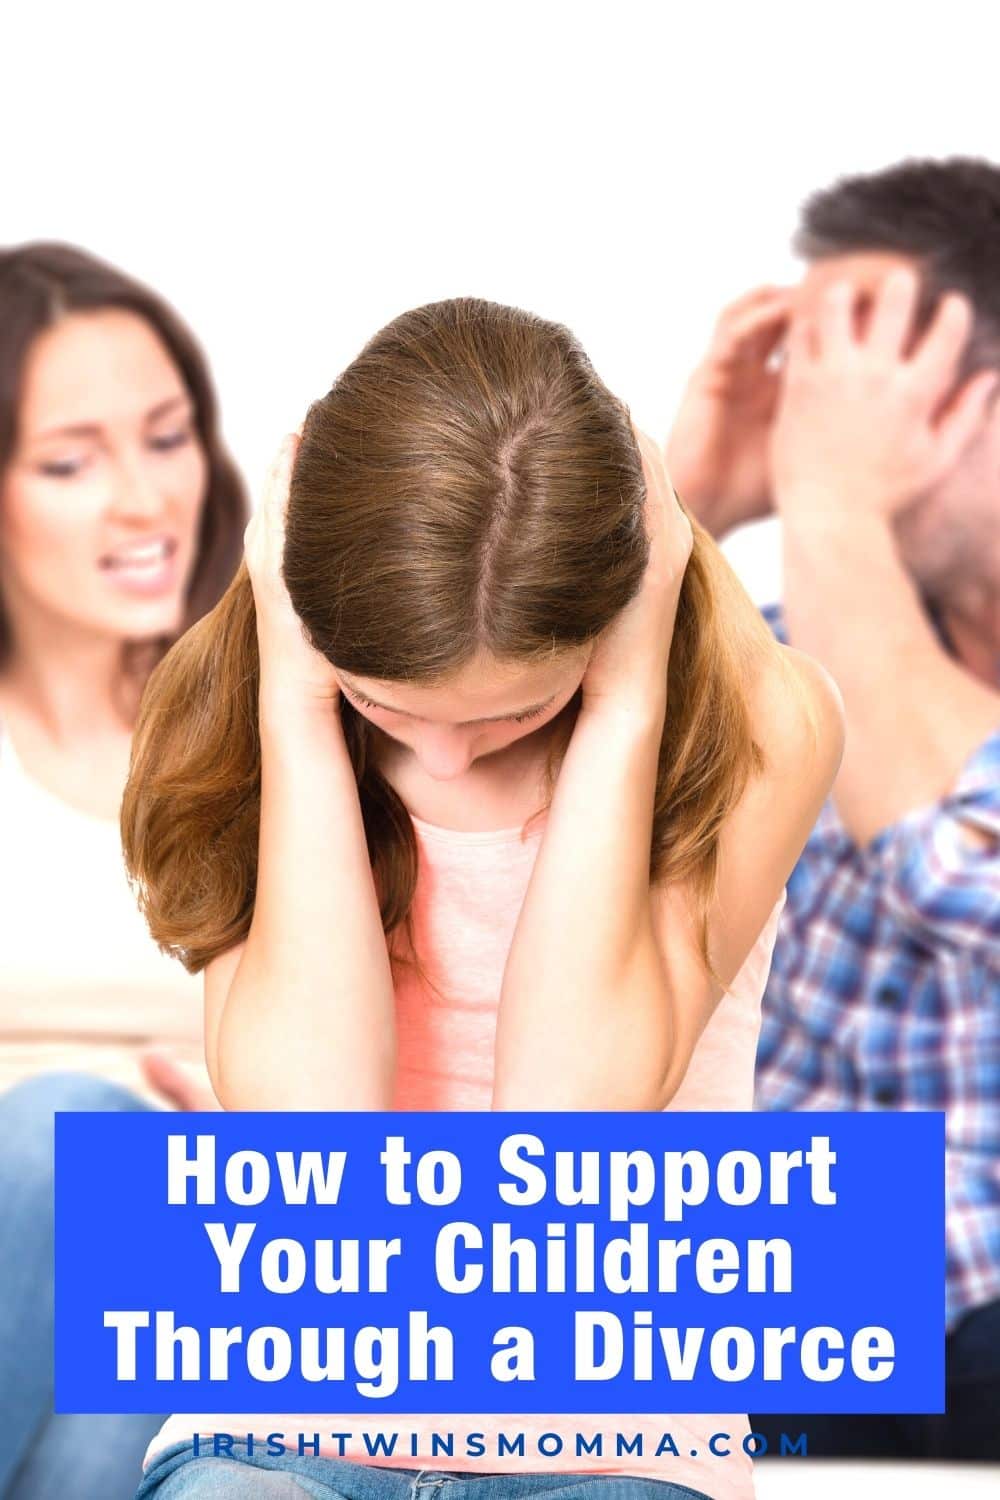 How To Support Your Children Through a Divorce